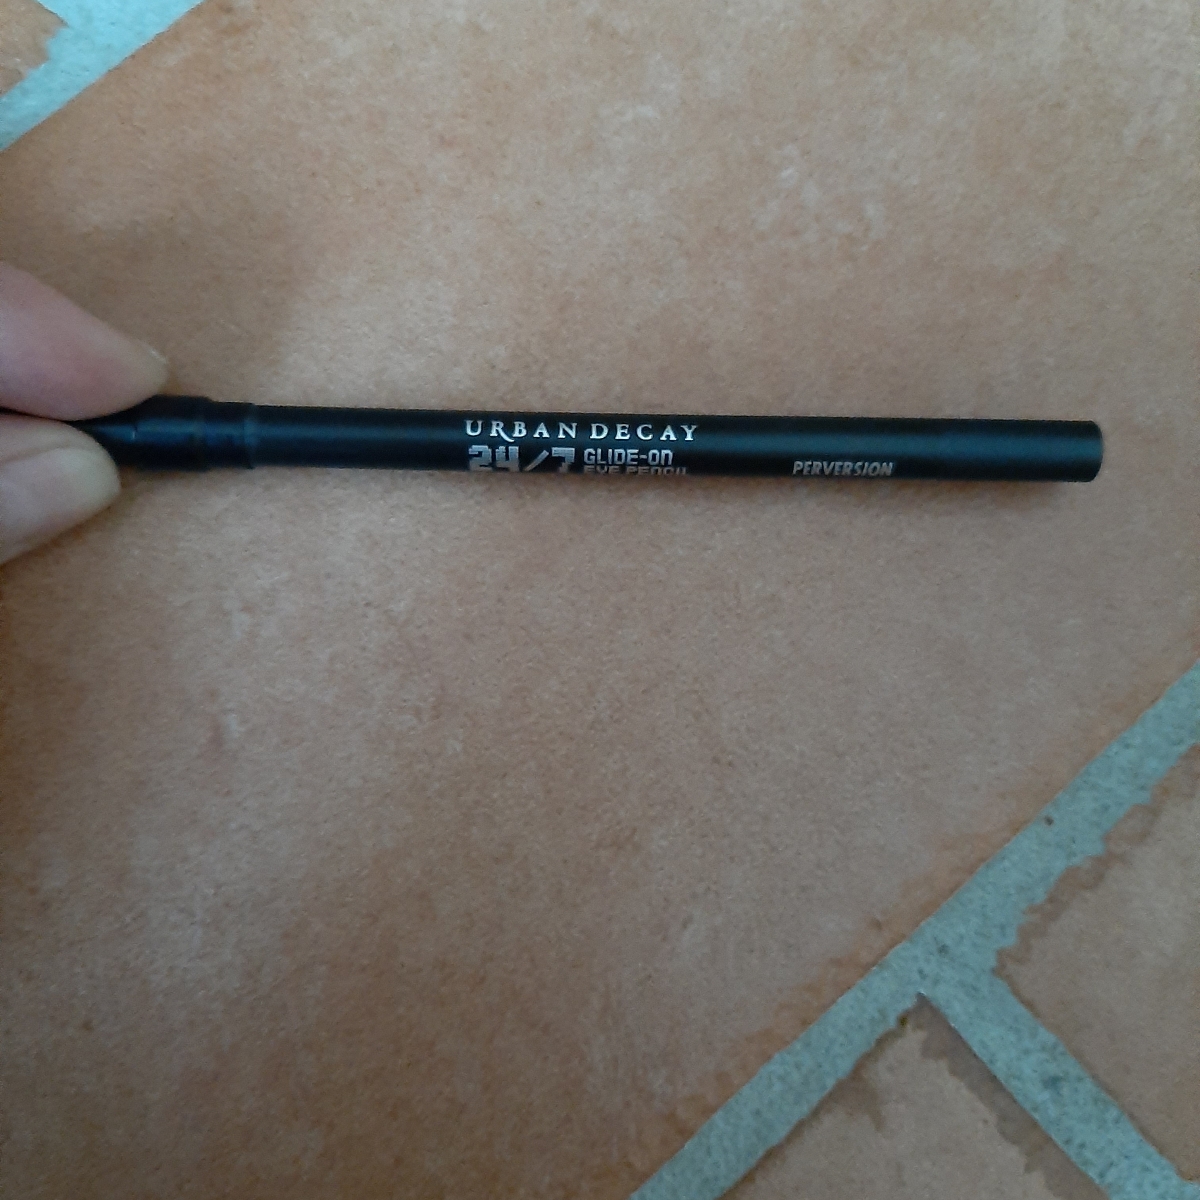 Urban Decay 24/7 Glide-on Eye Pencil Perversion Review | abillion